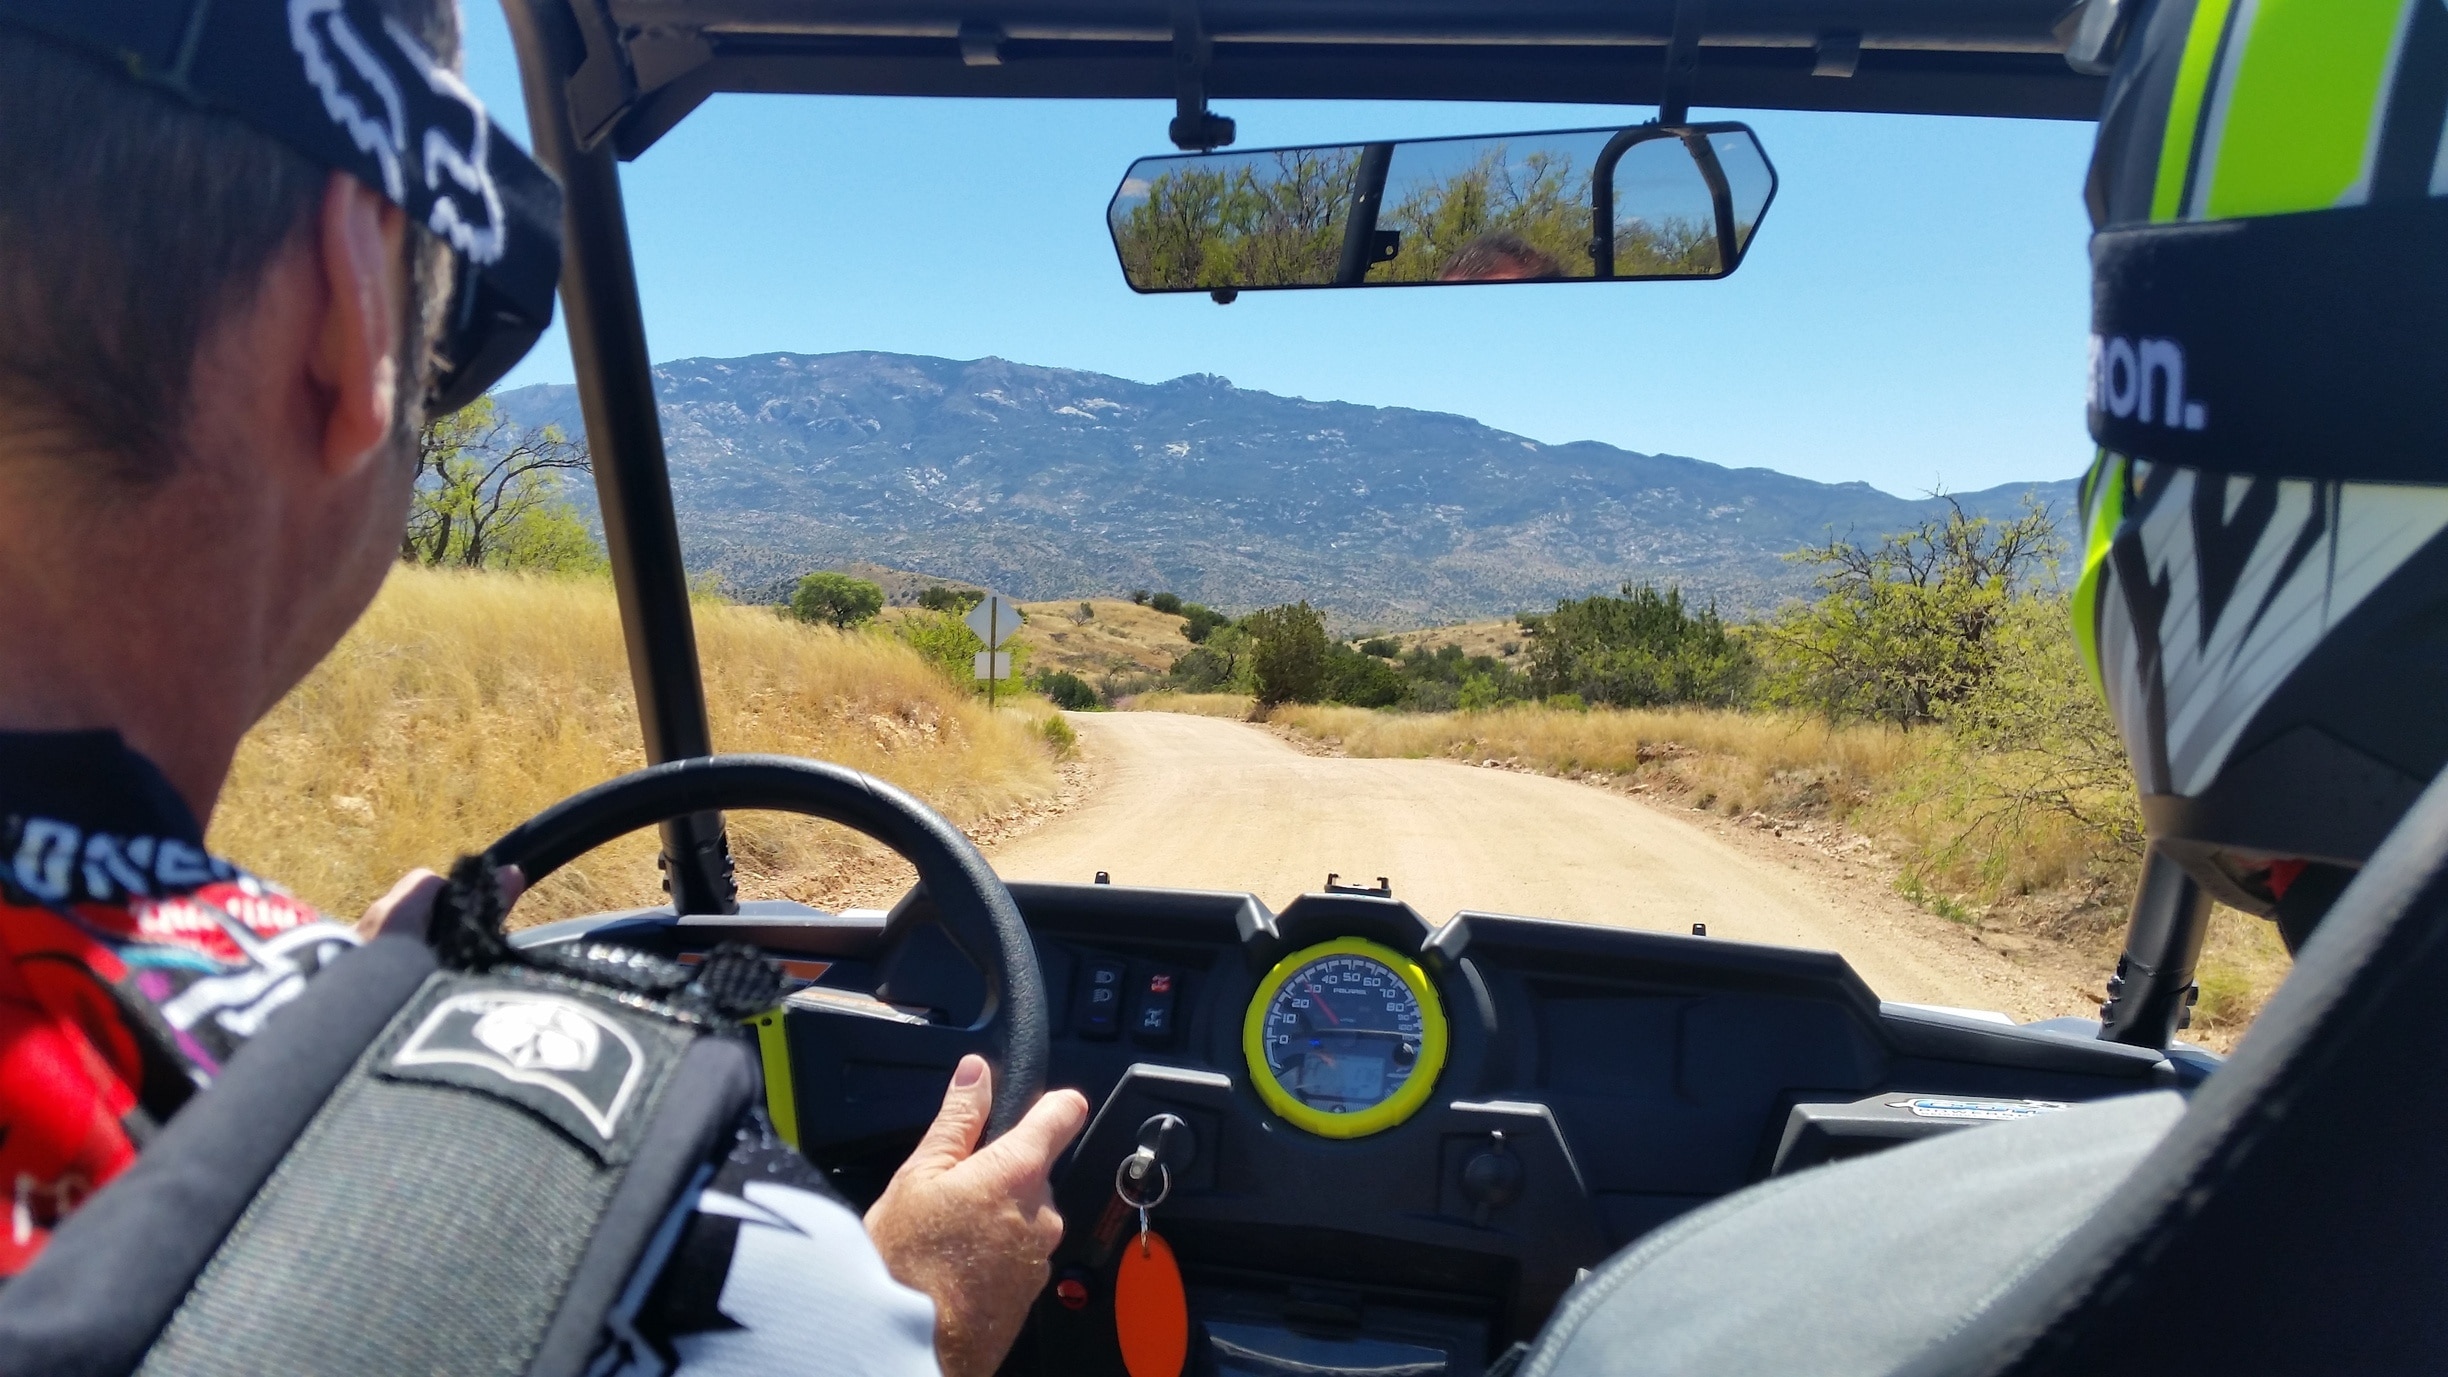 We drove with our friends in their Polaris dune buggy from E Snyder Rd in Tucson right into the Catalina Mountains. The dirt roads are 4WD only.
#adventure #adrenalfatigue #wildwest #Arizona #Merica 